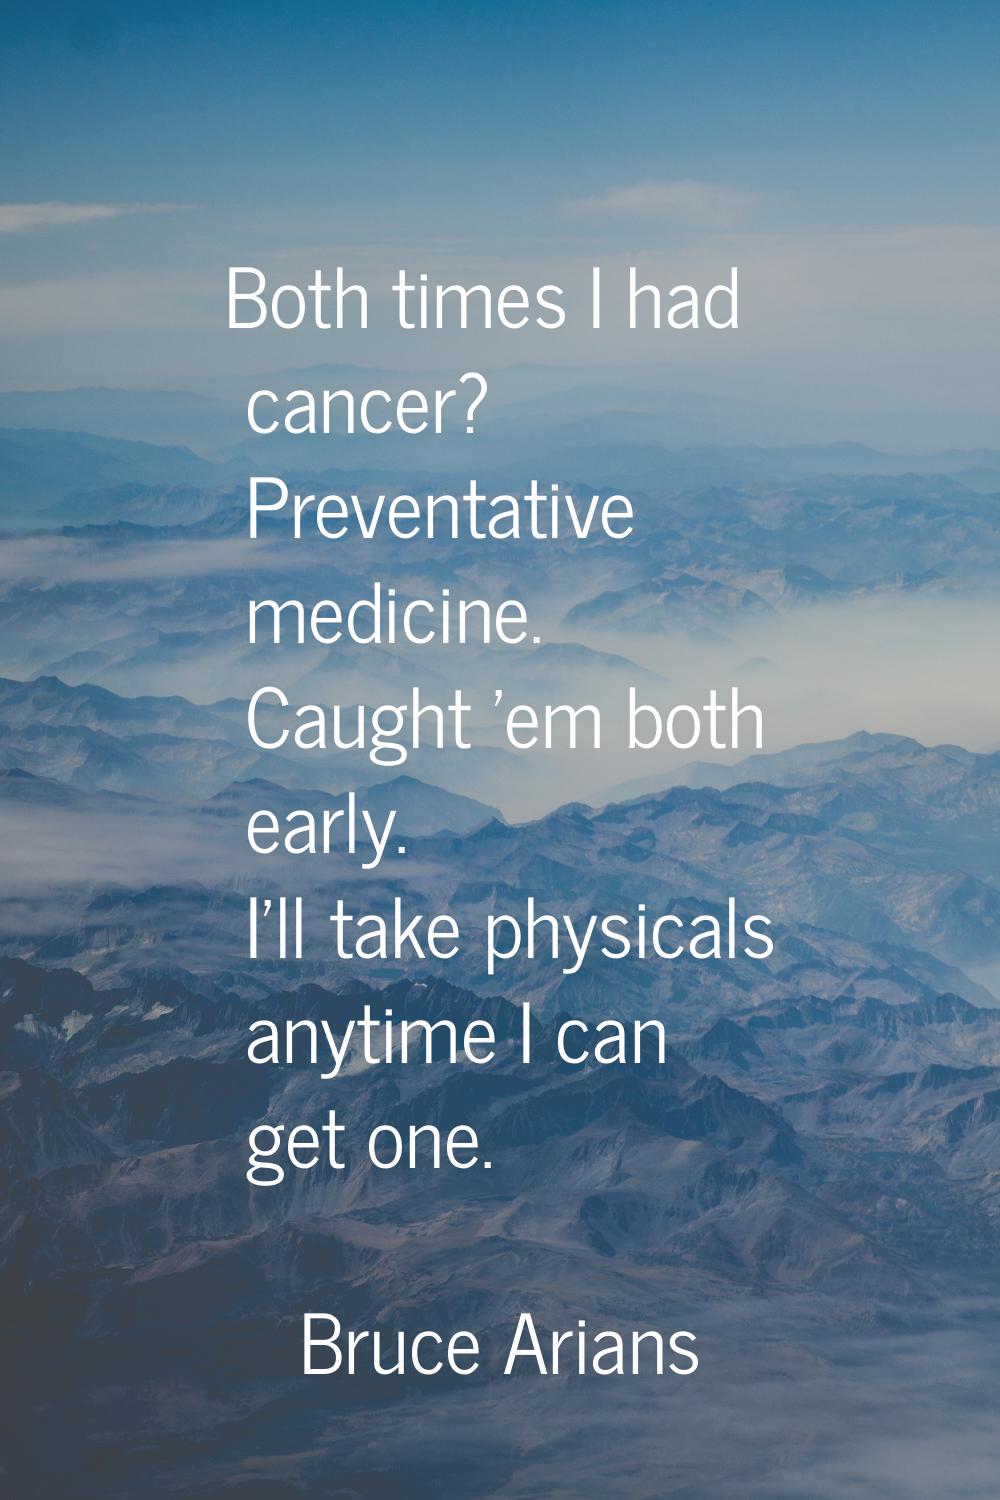 Both times I had cancer? Preventative medicine. Caught 'em both early. I'll take physicals anytime 